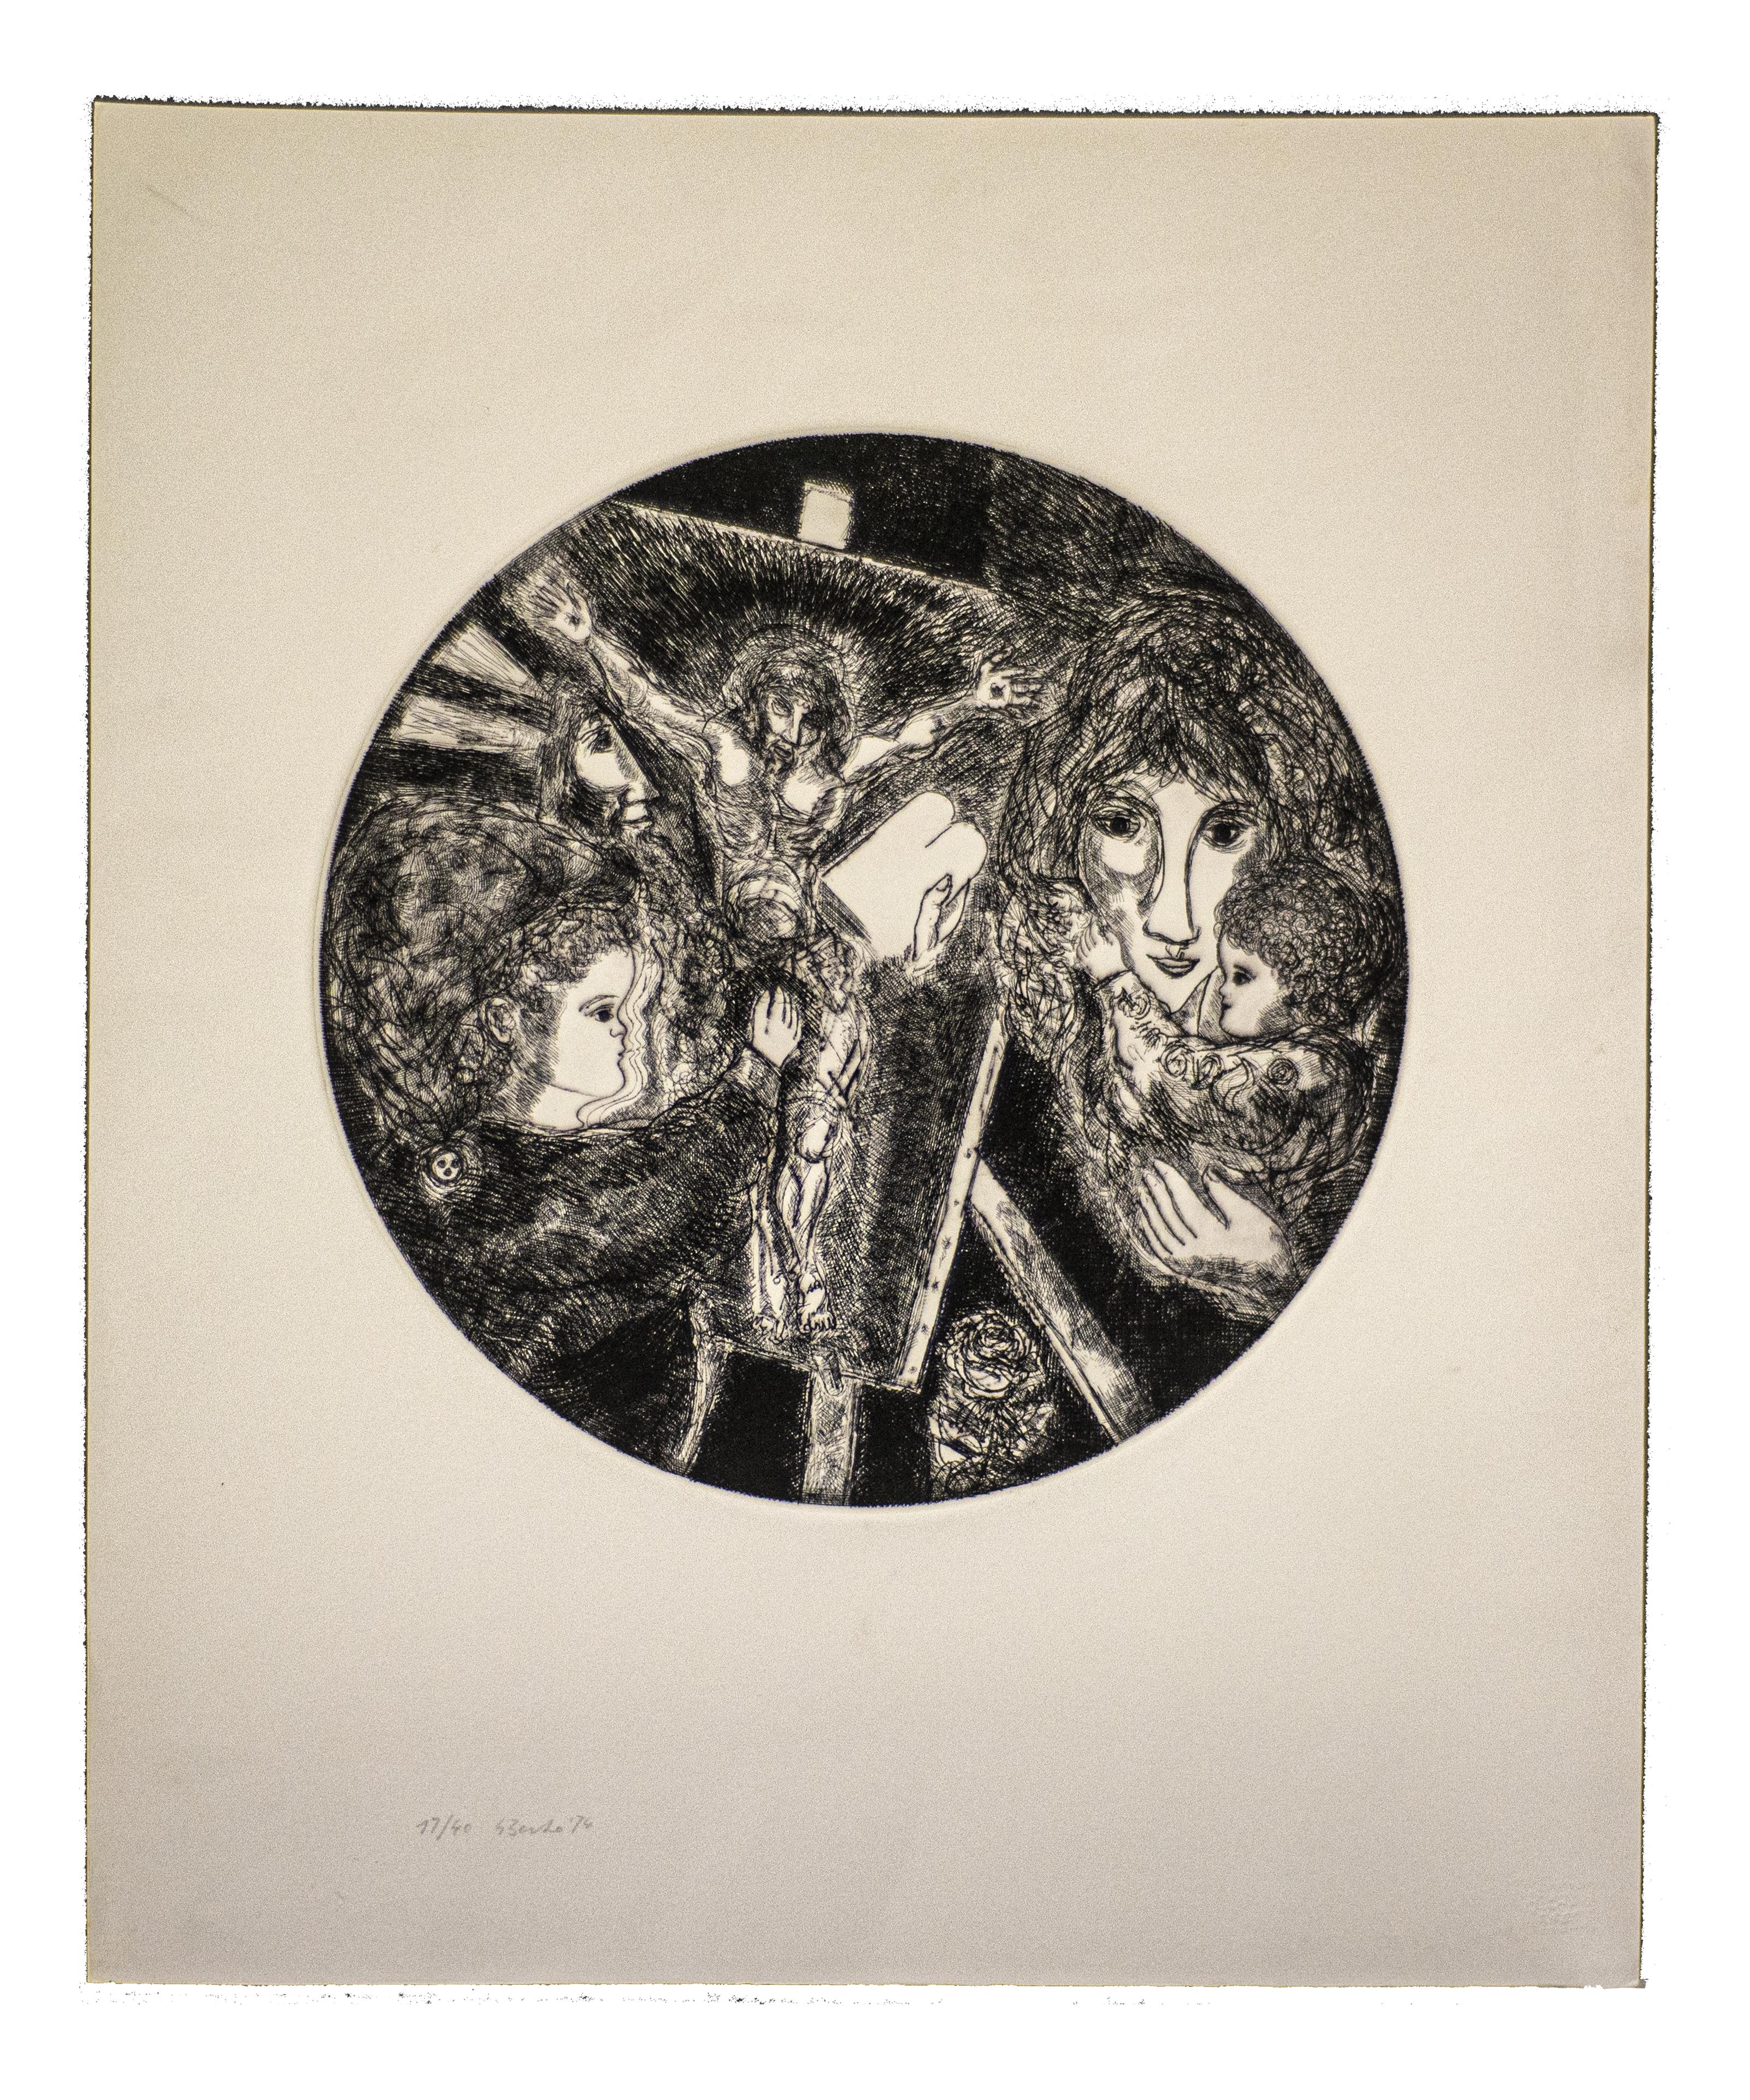 Painter is an original etching on paper realized by Gian Paolo Berto, in 1974.

Good conditions .

Hand-signed and numbered, edition: 17/40.

Sheet dimension: 61 x 49.5

The artwork represents a painter drawing The artwork is depicted skillfully